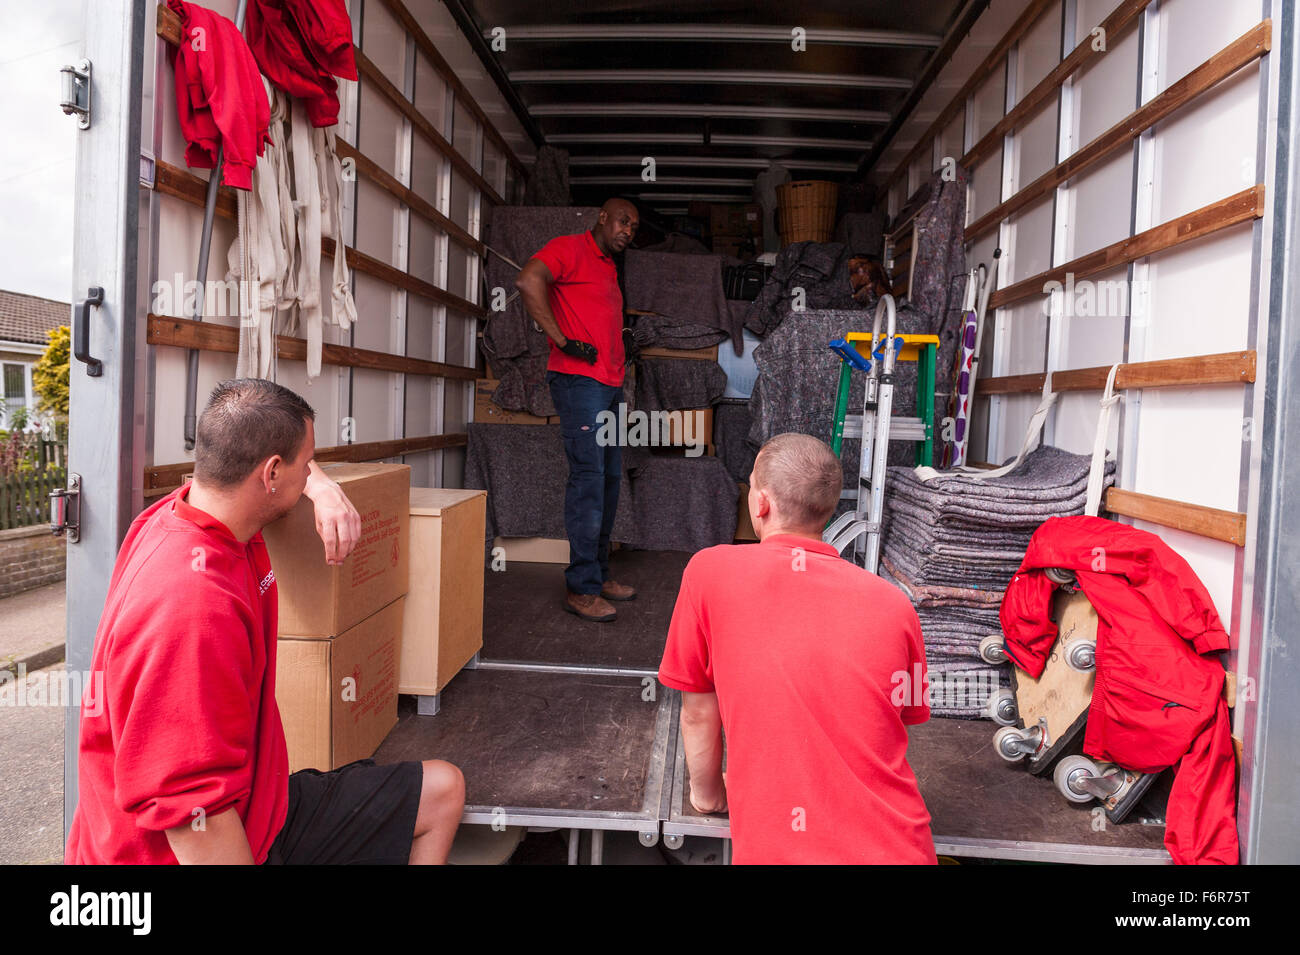 Removal men packing a removal van helping family move house in the Uk Stock Photo